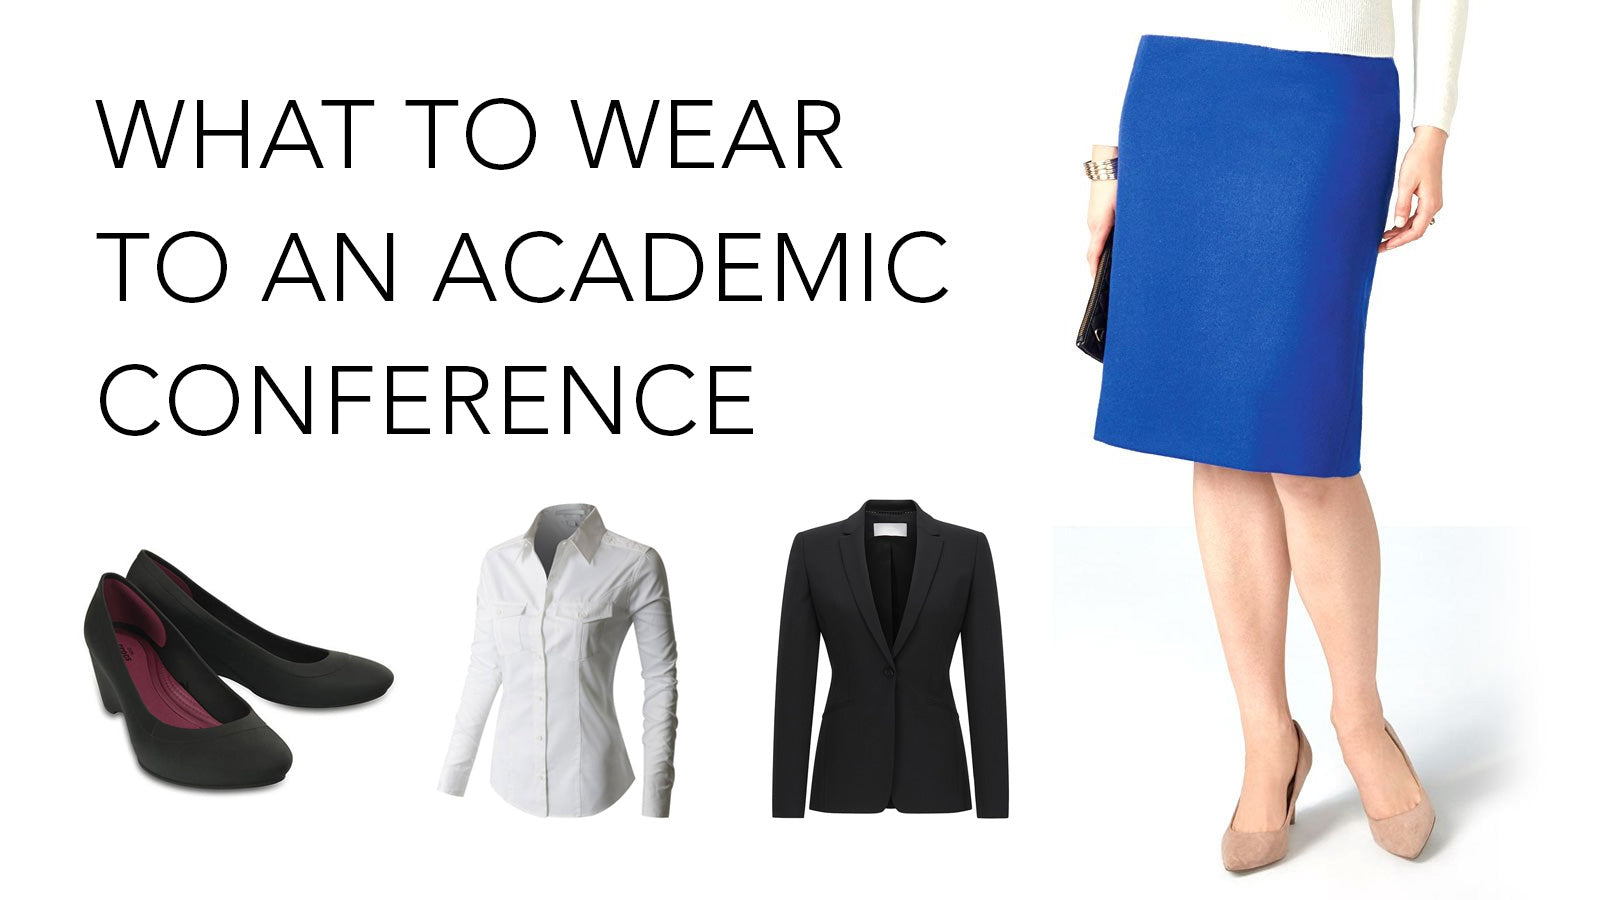 What to wear to an academic conference (Women's Guide)